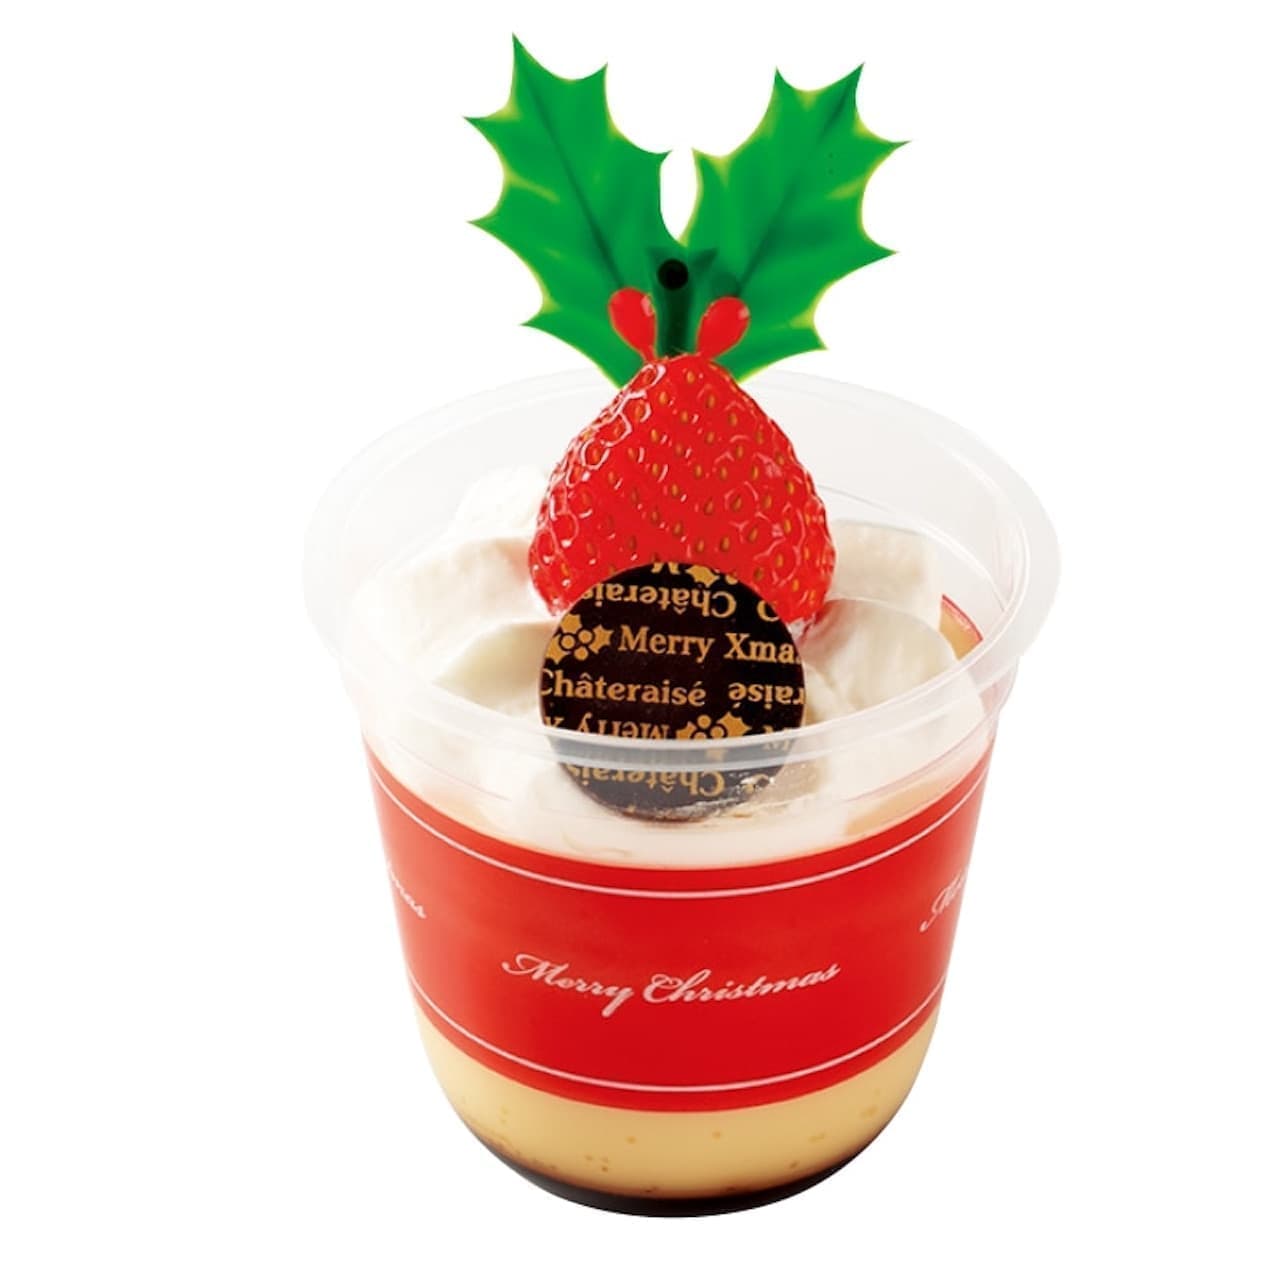 Chateraise "Xmas Pudding Cups